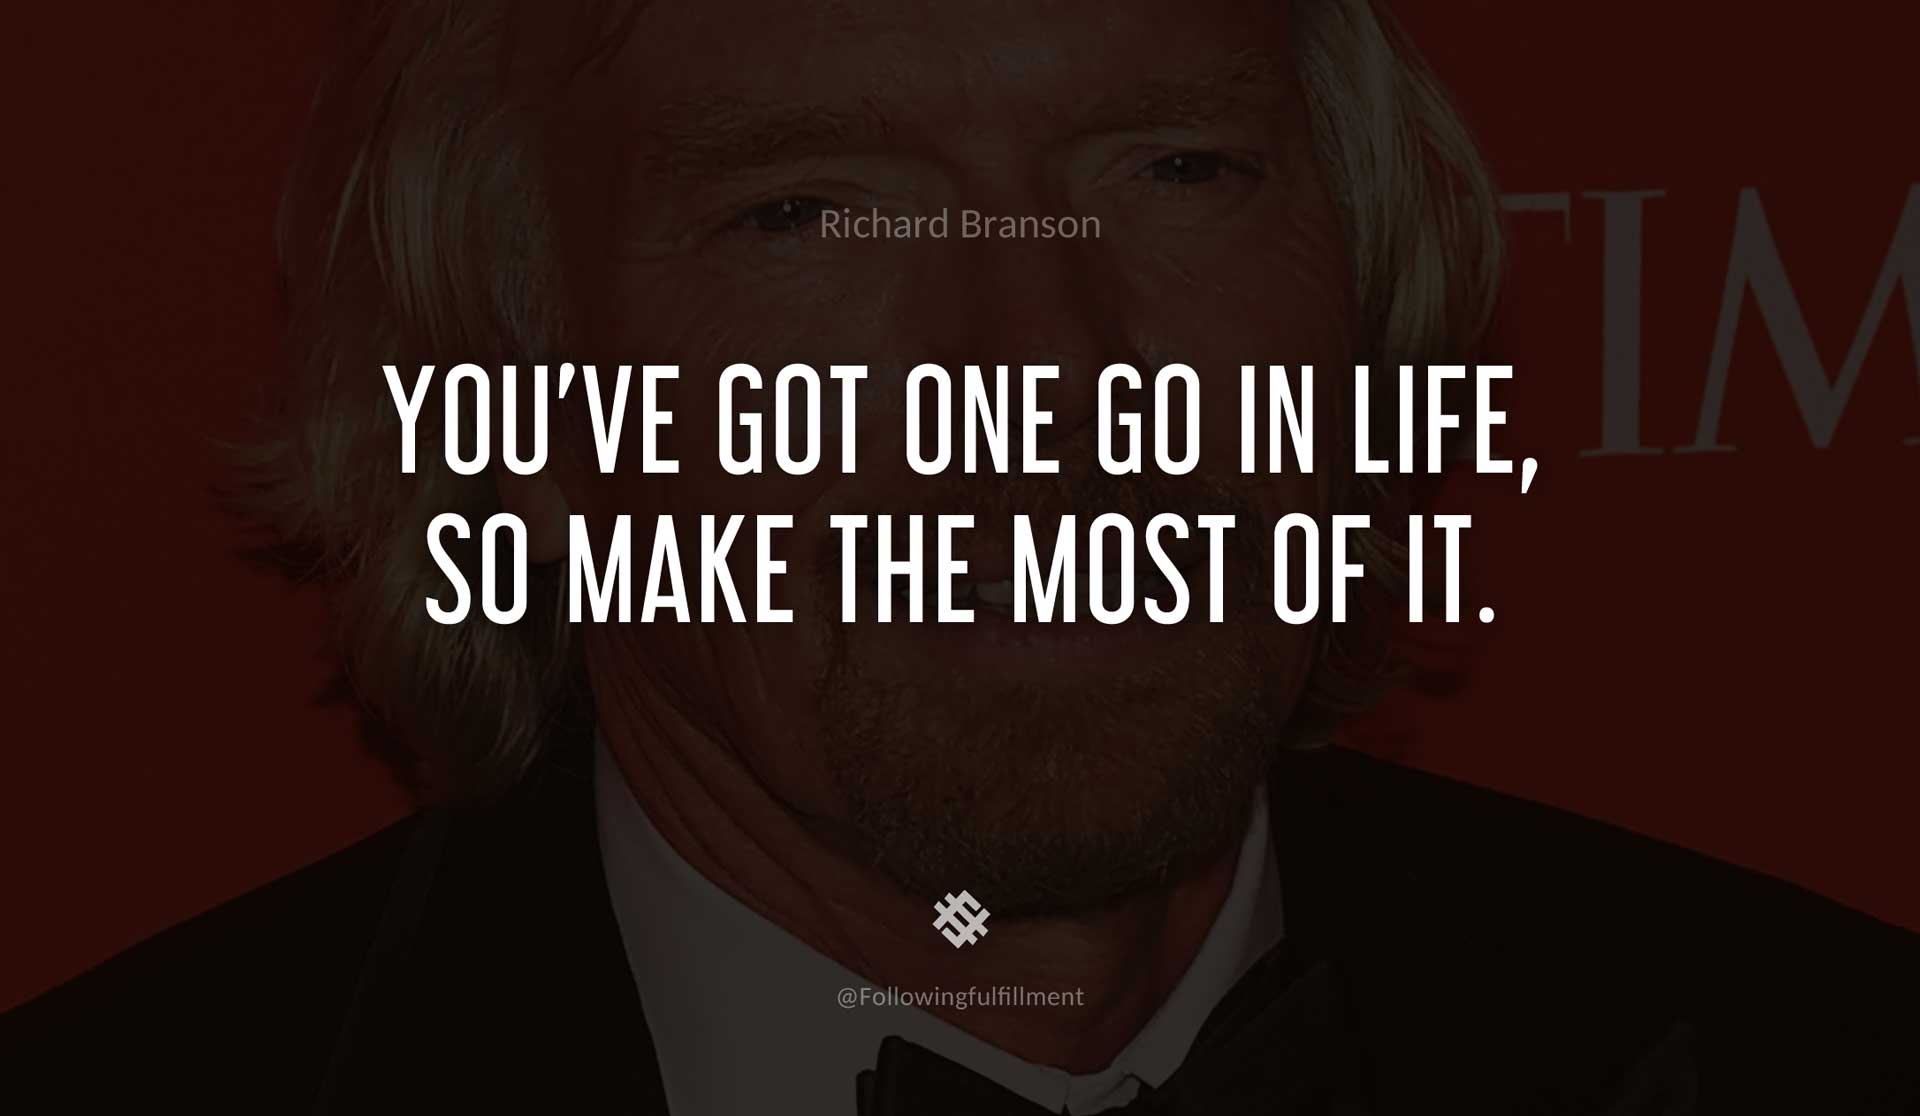 You've-got-one-go-in-life,-so-make-the-most-of-it.-RICHARD-BRANSON-Quote.jpg